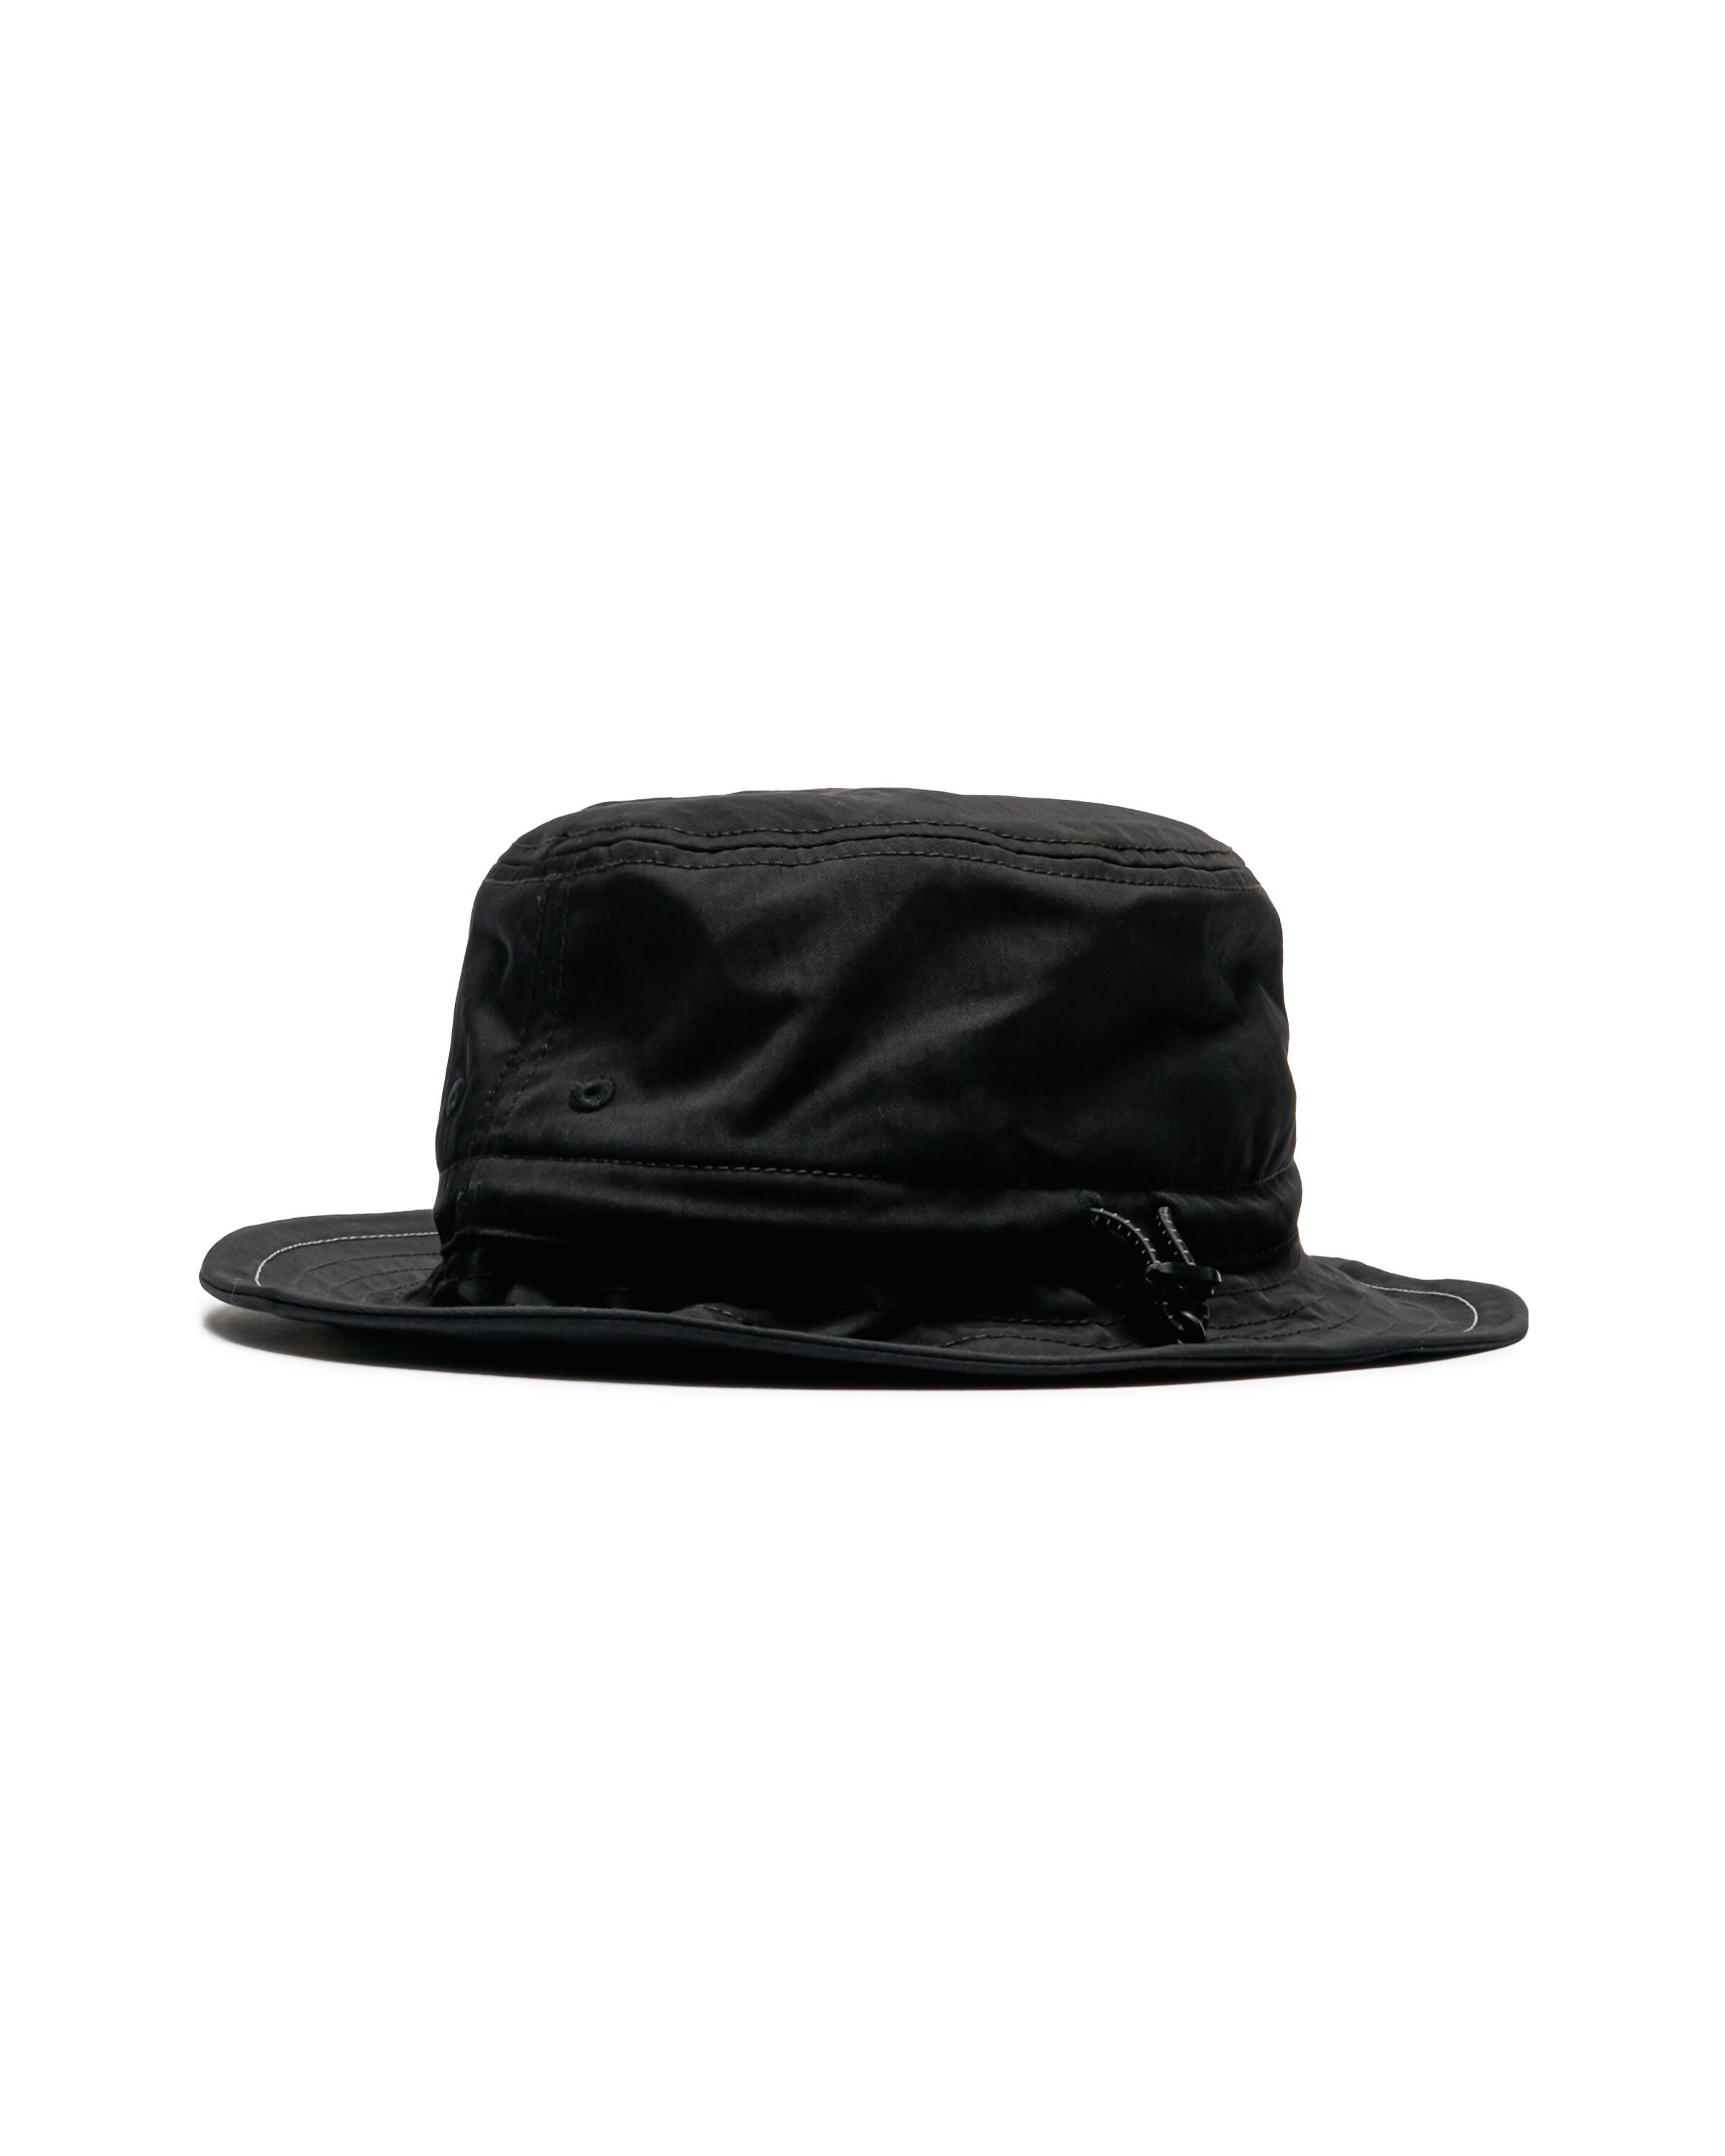 Gramicci x And Wander NYCO HAT